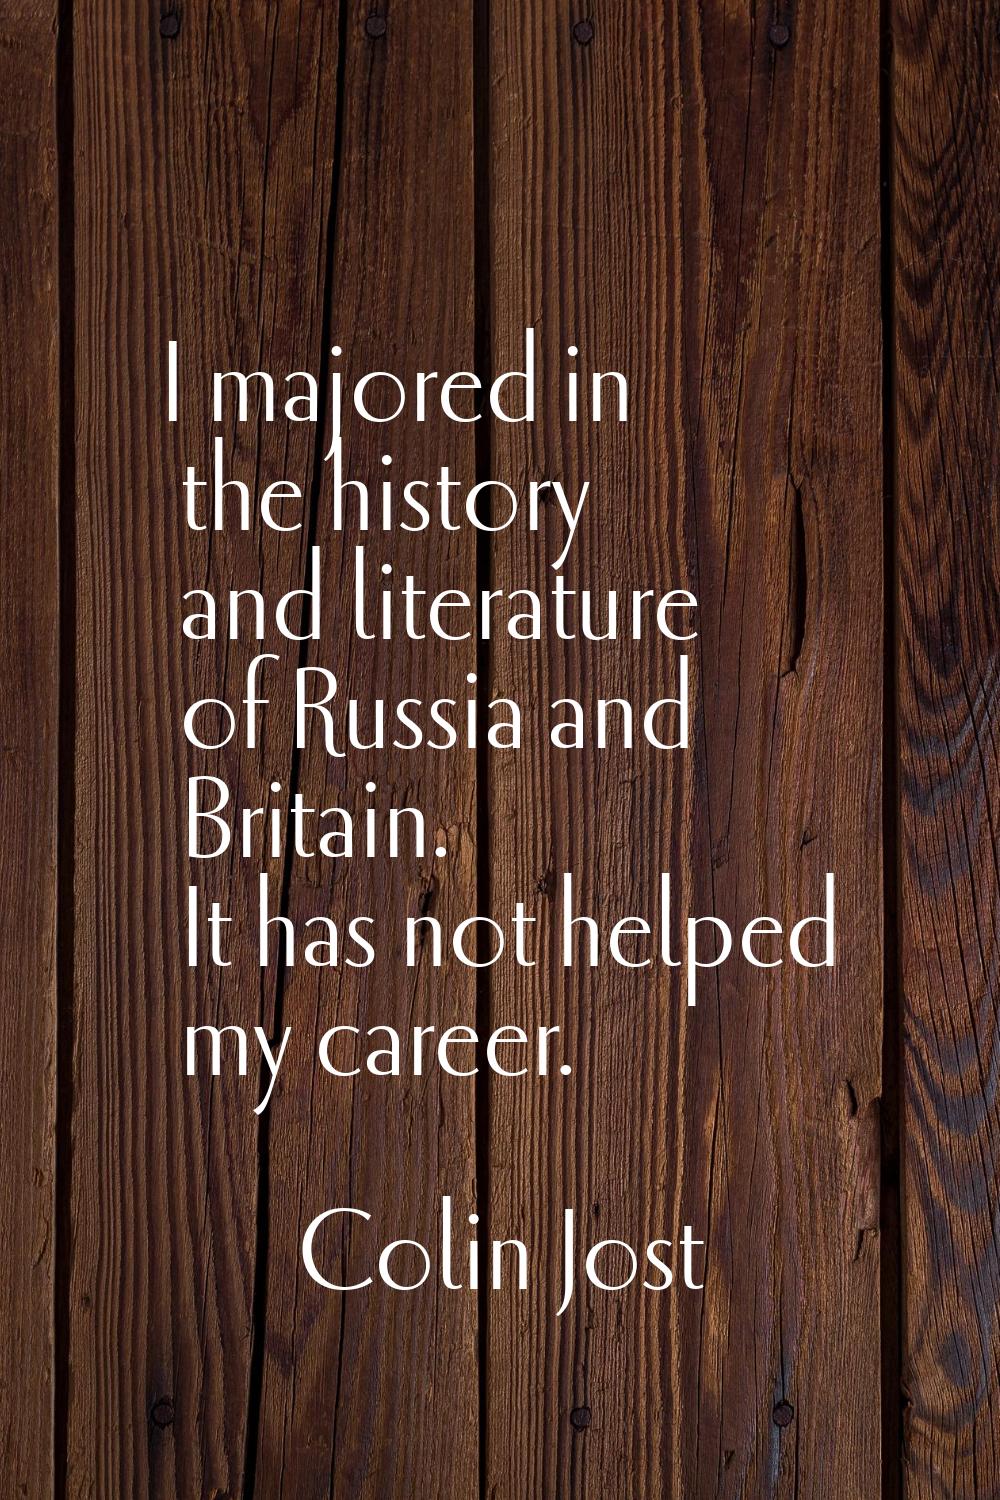 I majored in the history and literature of Russia and Britain. It has not helped my career.